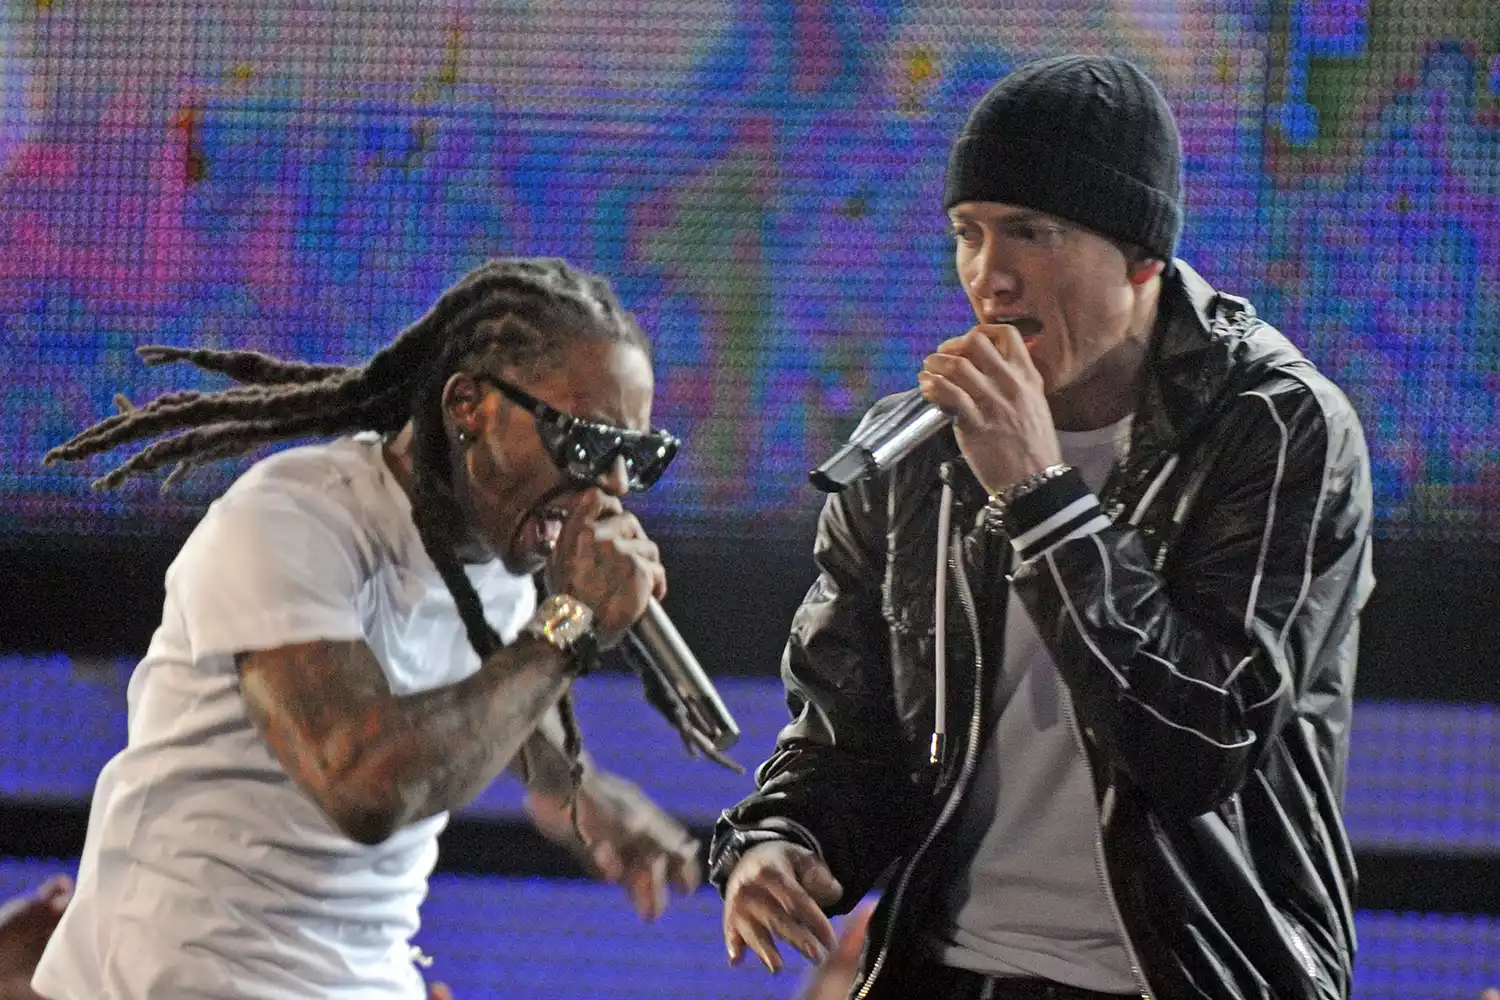 Lil Wayne (L) and Eminem perform during the Grammy Show at the 52nd Grammy Awards in Los Angeles, California on January 31, 2010